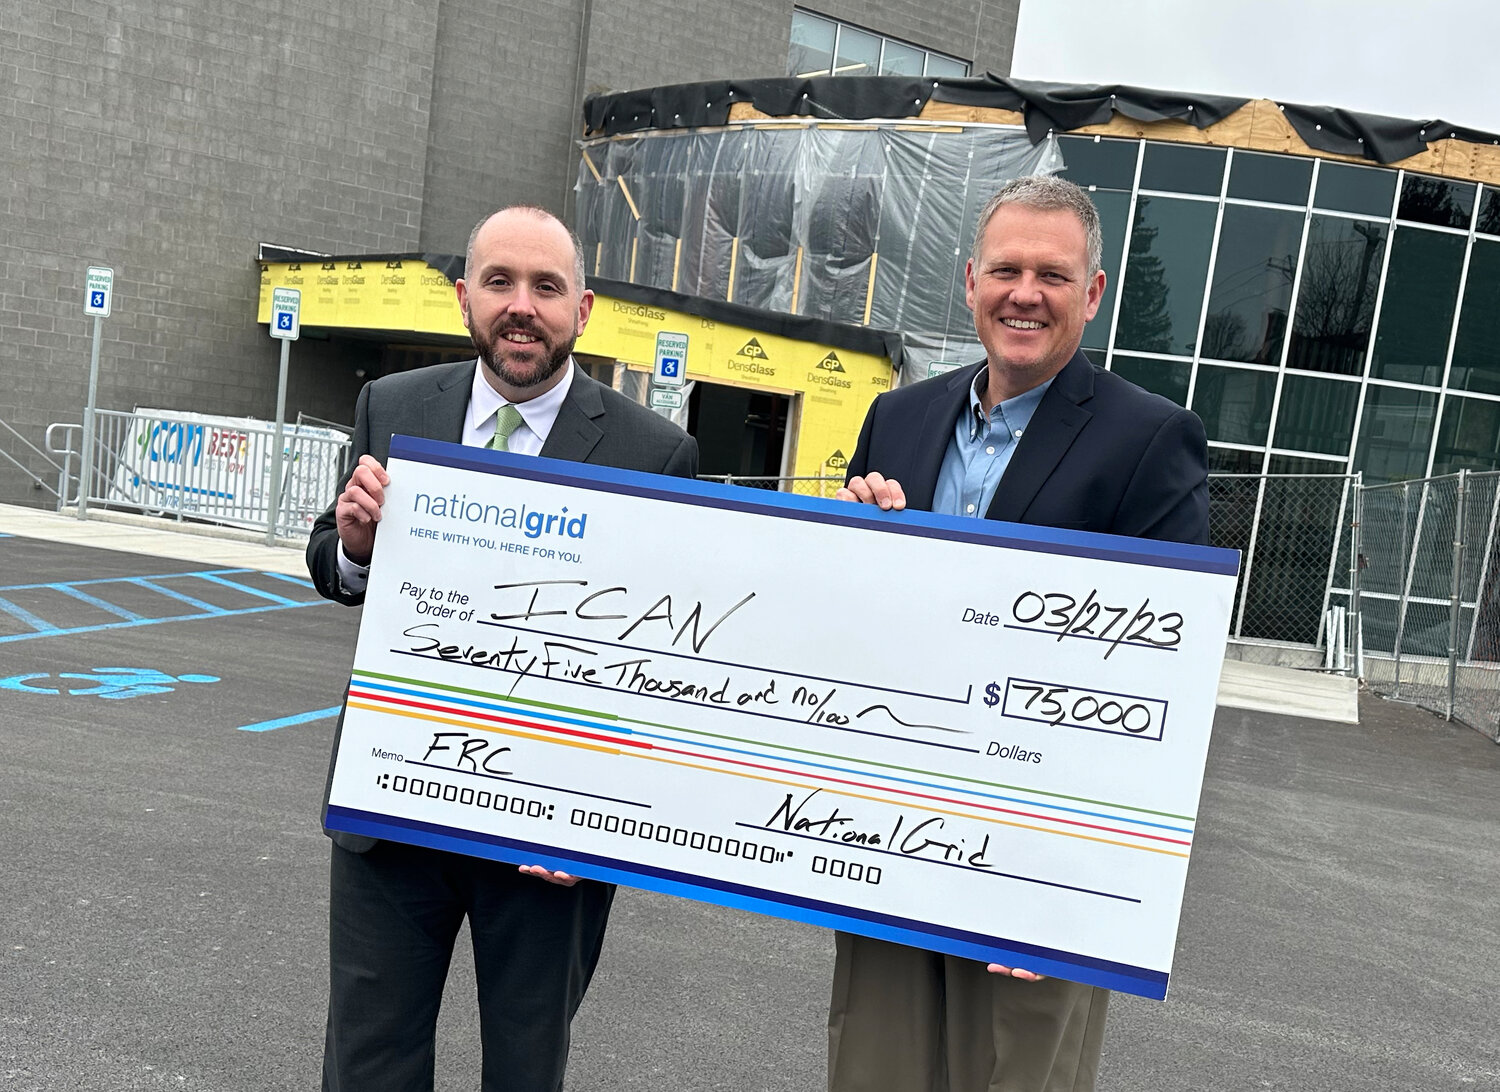 From left to right: Steven Bulger, ICAN CEO/Executive Director and Richard T. Fox, PE, National Grid Manager of Customer &amp; Community Engagement, Mohawk Valley.